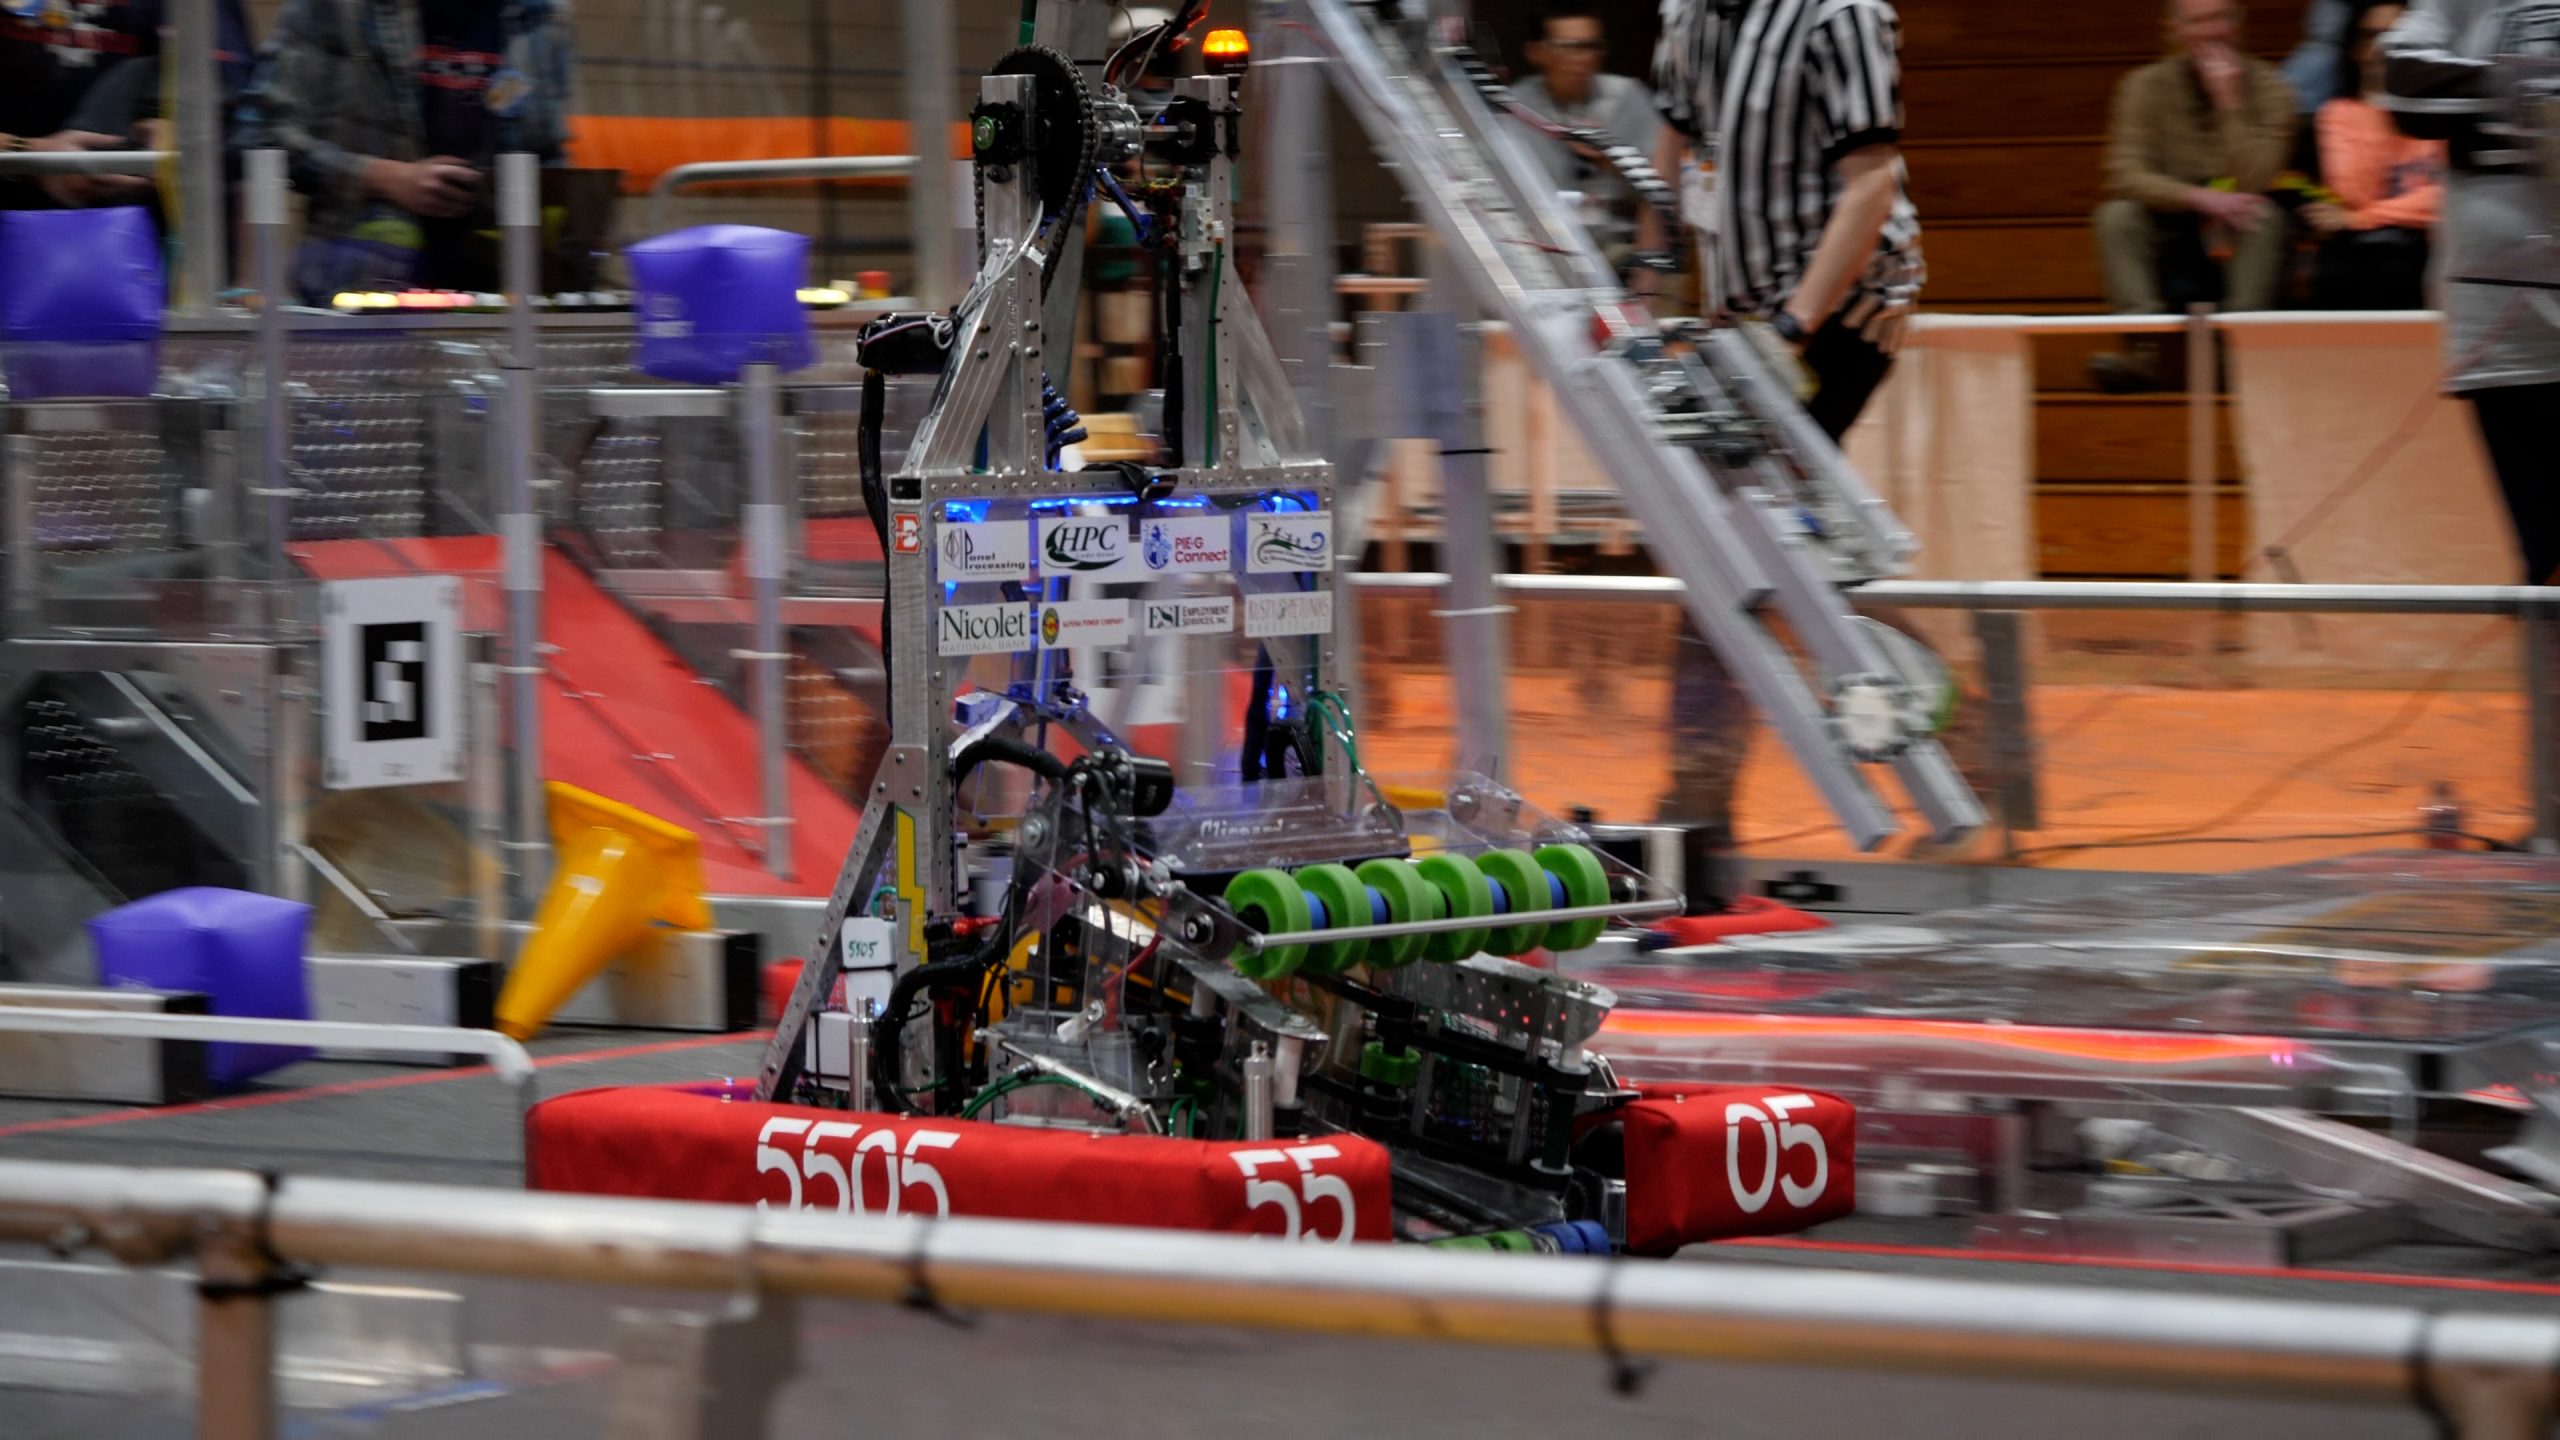 Alpena High School Robotics Team Now Ranked 9th in the State – WBKB 11